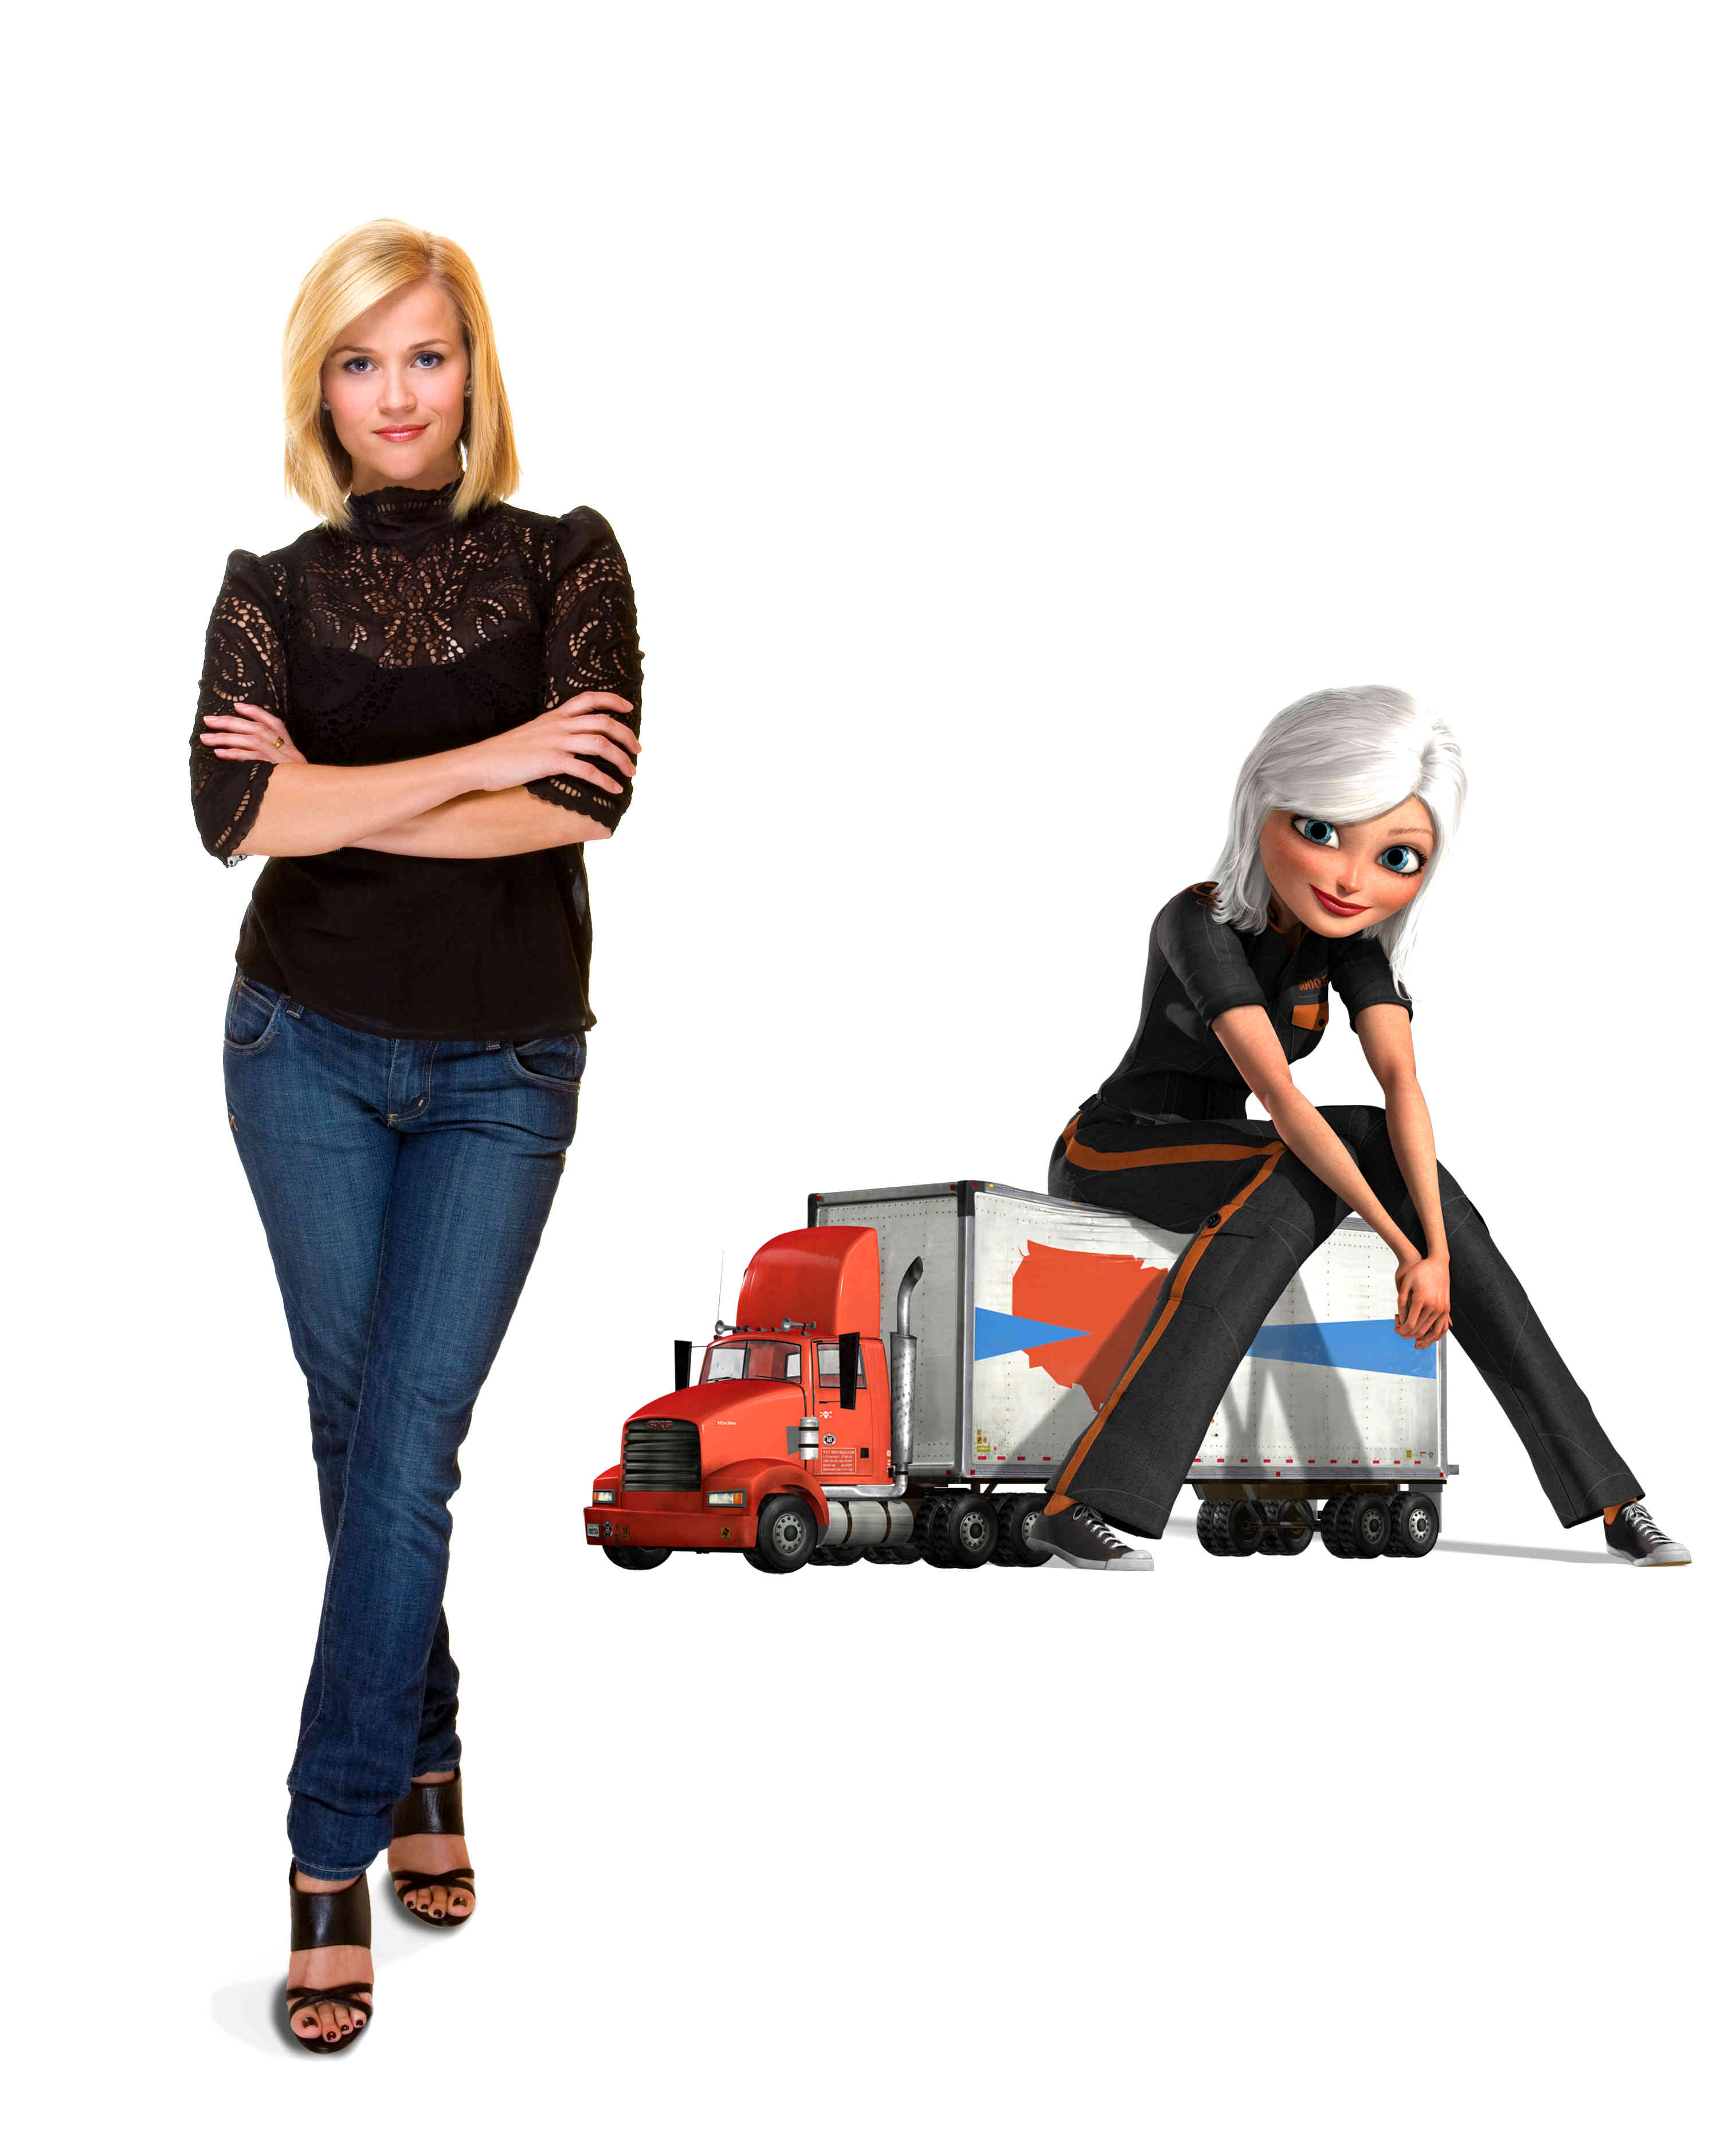 Reese Witherspoon voices Susan Murphy/Ginormica in Paramount Pictures' Monsters vs. Aliens (2009)